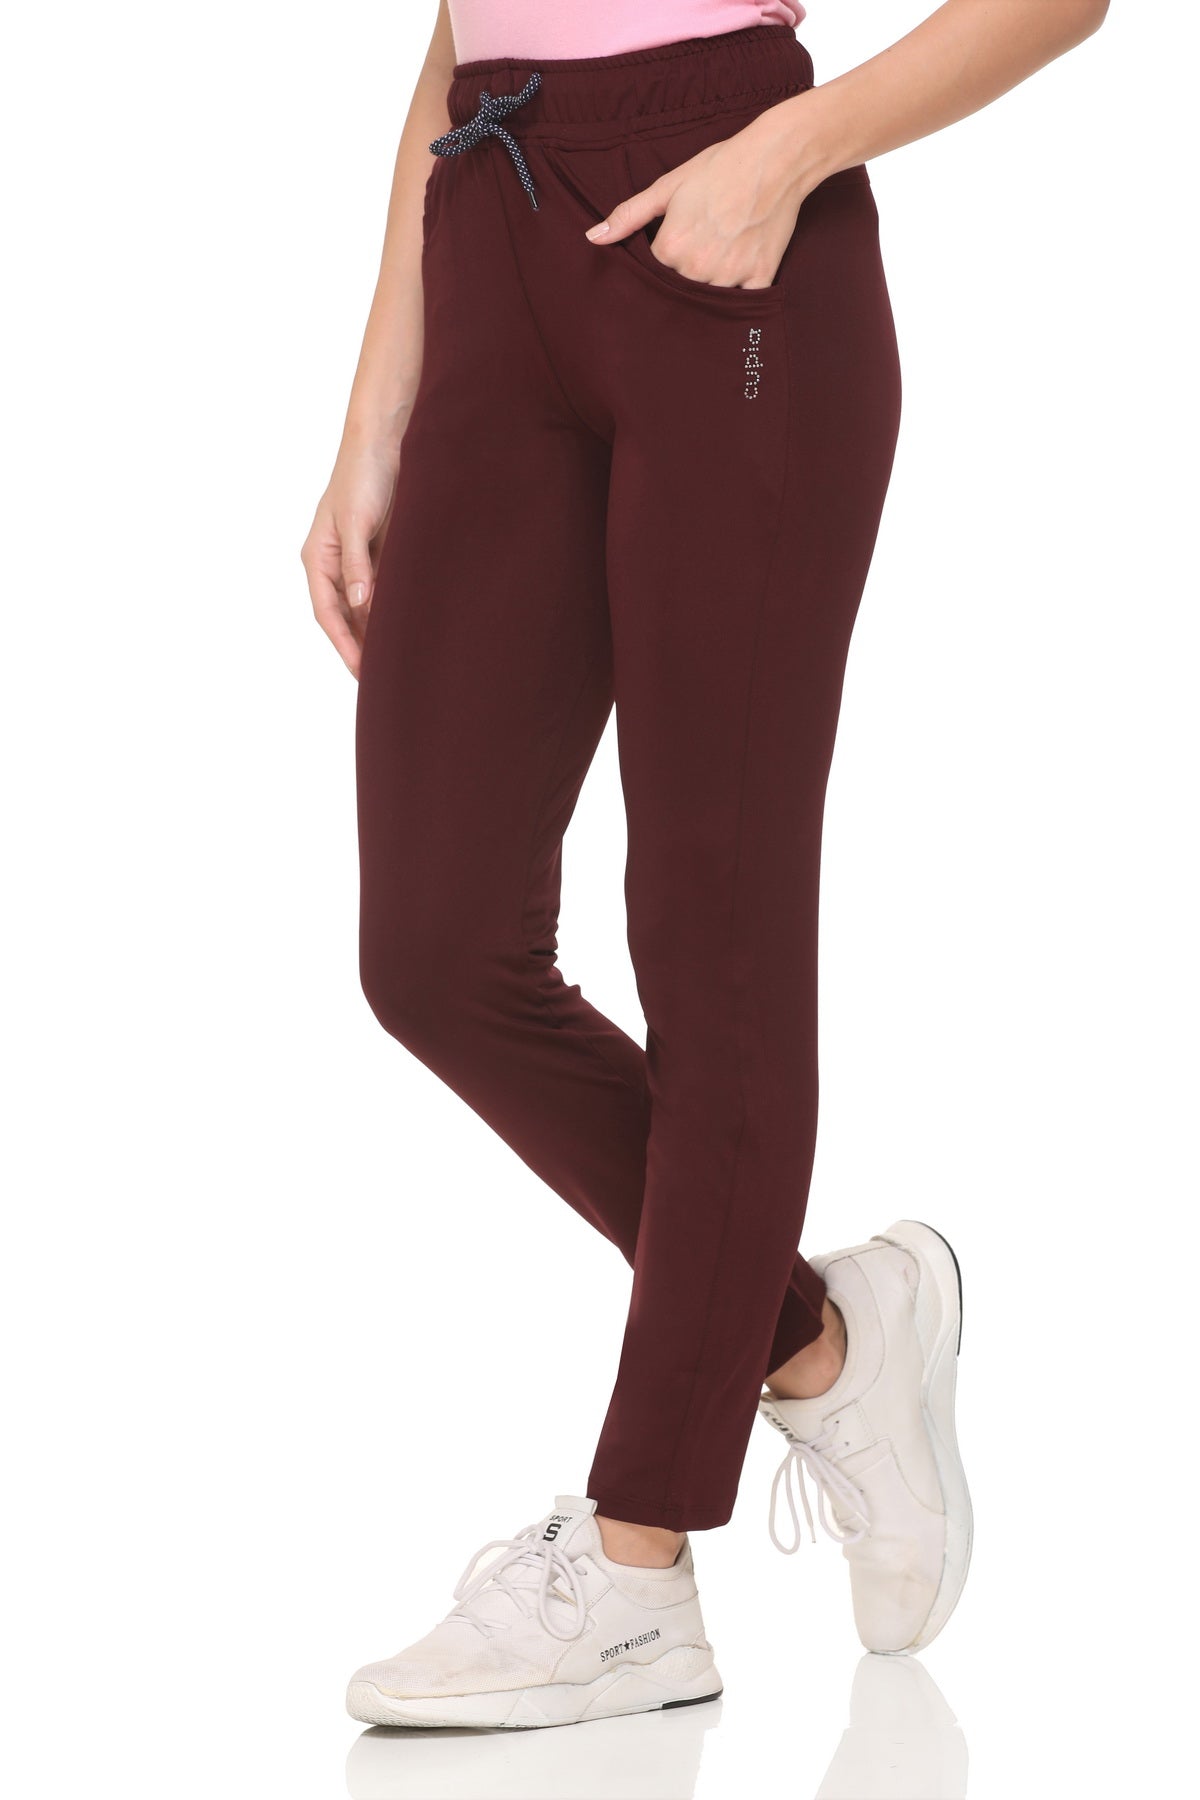 Cupid Trackpants For Women,Daily Joggers, Yoga and Gym Wear-Combo Pack of 3 freeshipping - Cupid Clothings